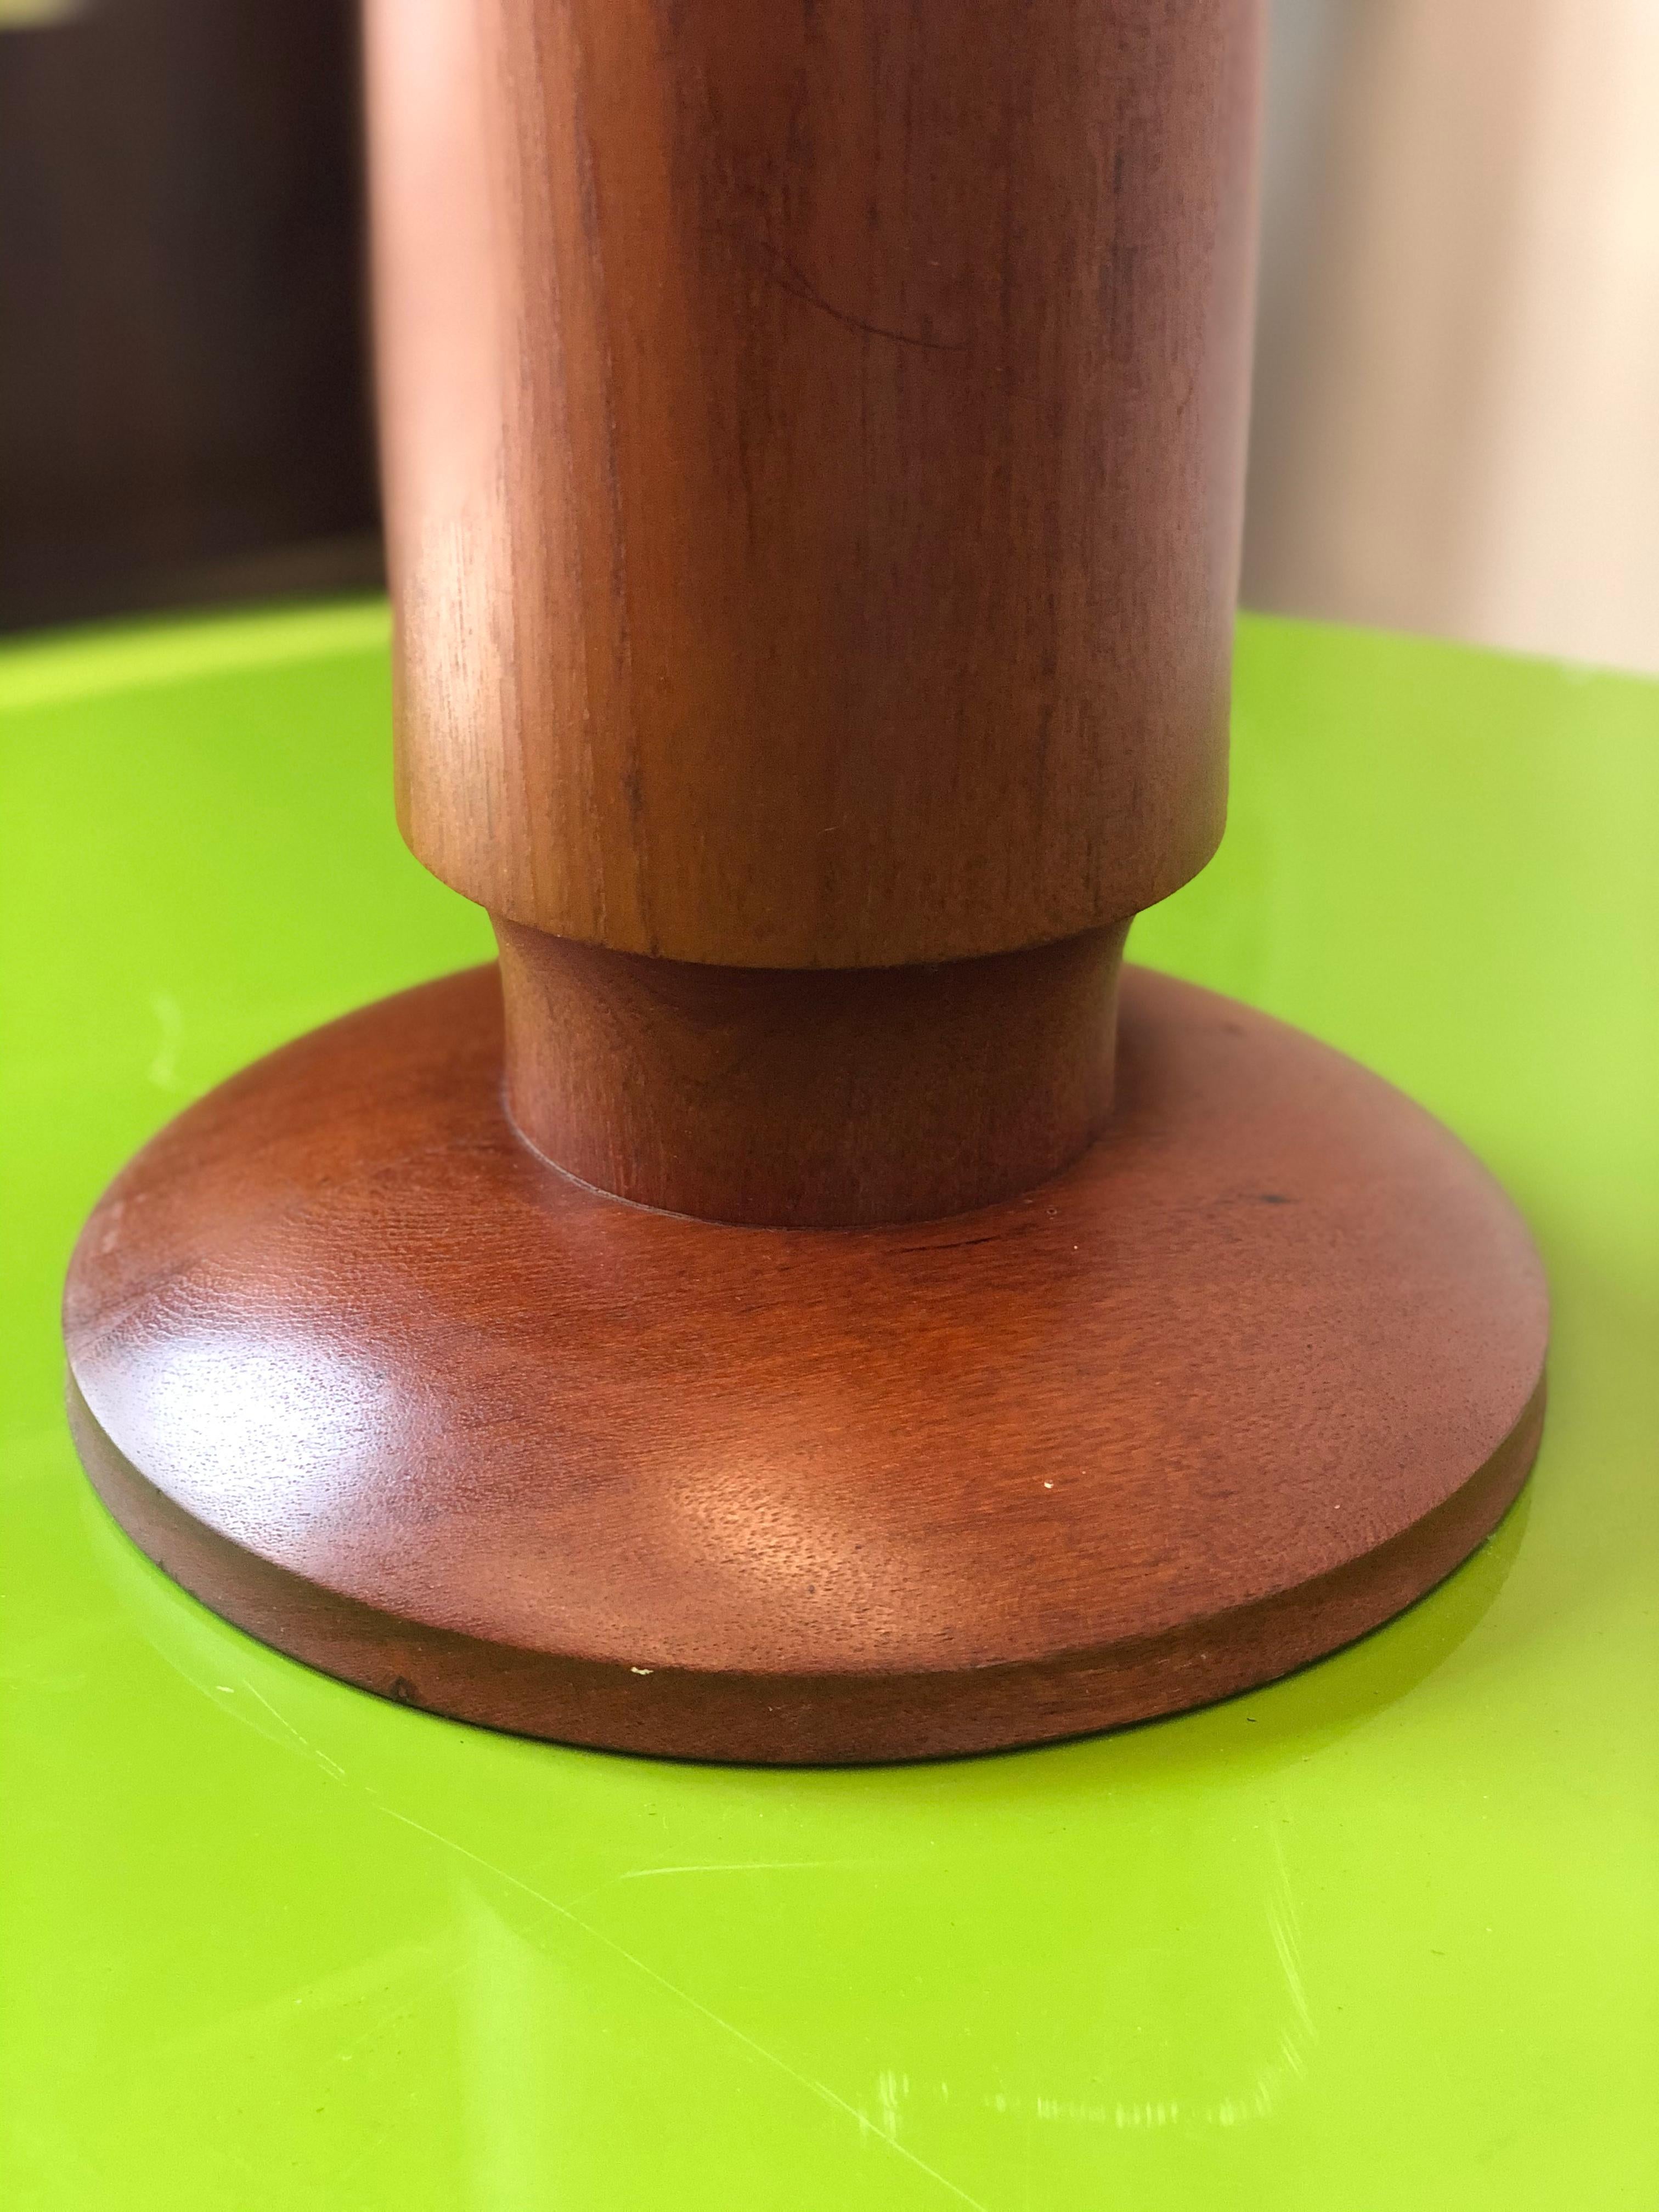 Large Vintage Danish Modern Teak Candle Stand, circa 1960s In Good Condition For Sale In San Antonio, TX